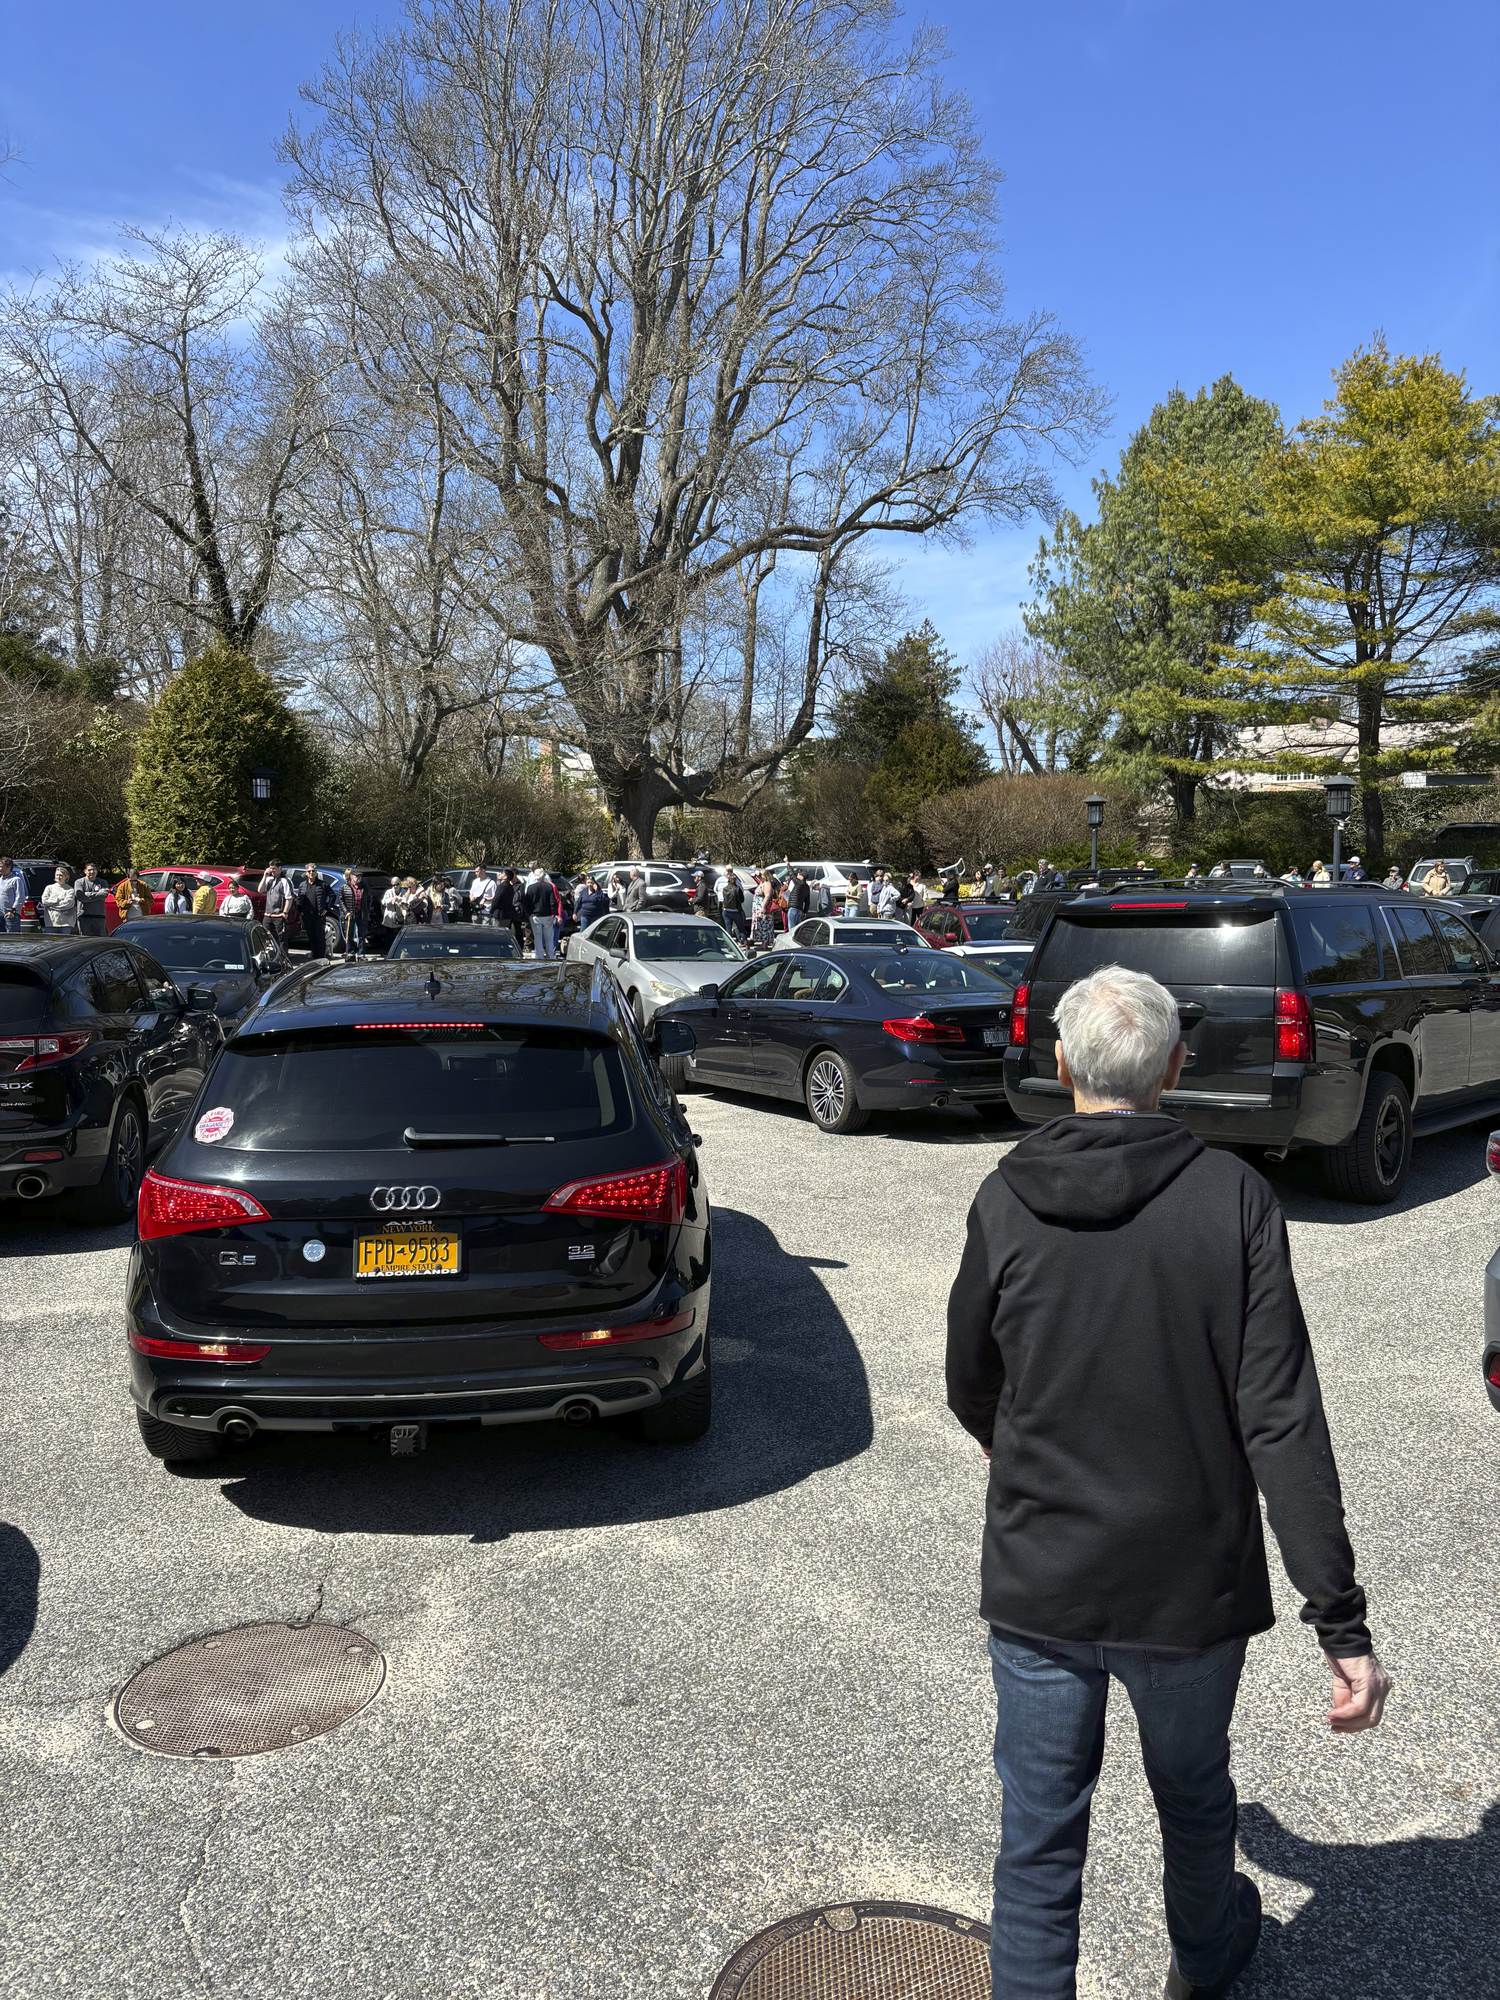 Visitors wait in line at the East Hampton Library for solar glasses on Monday afternoon.